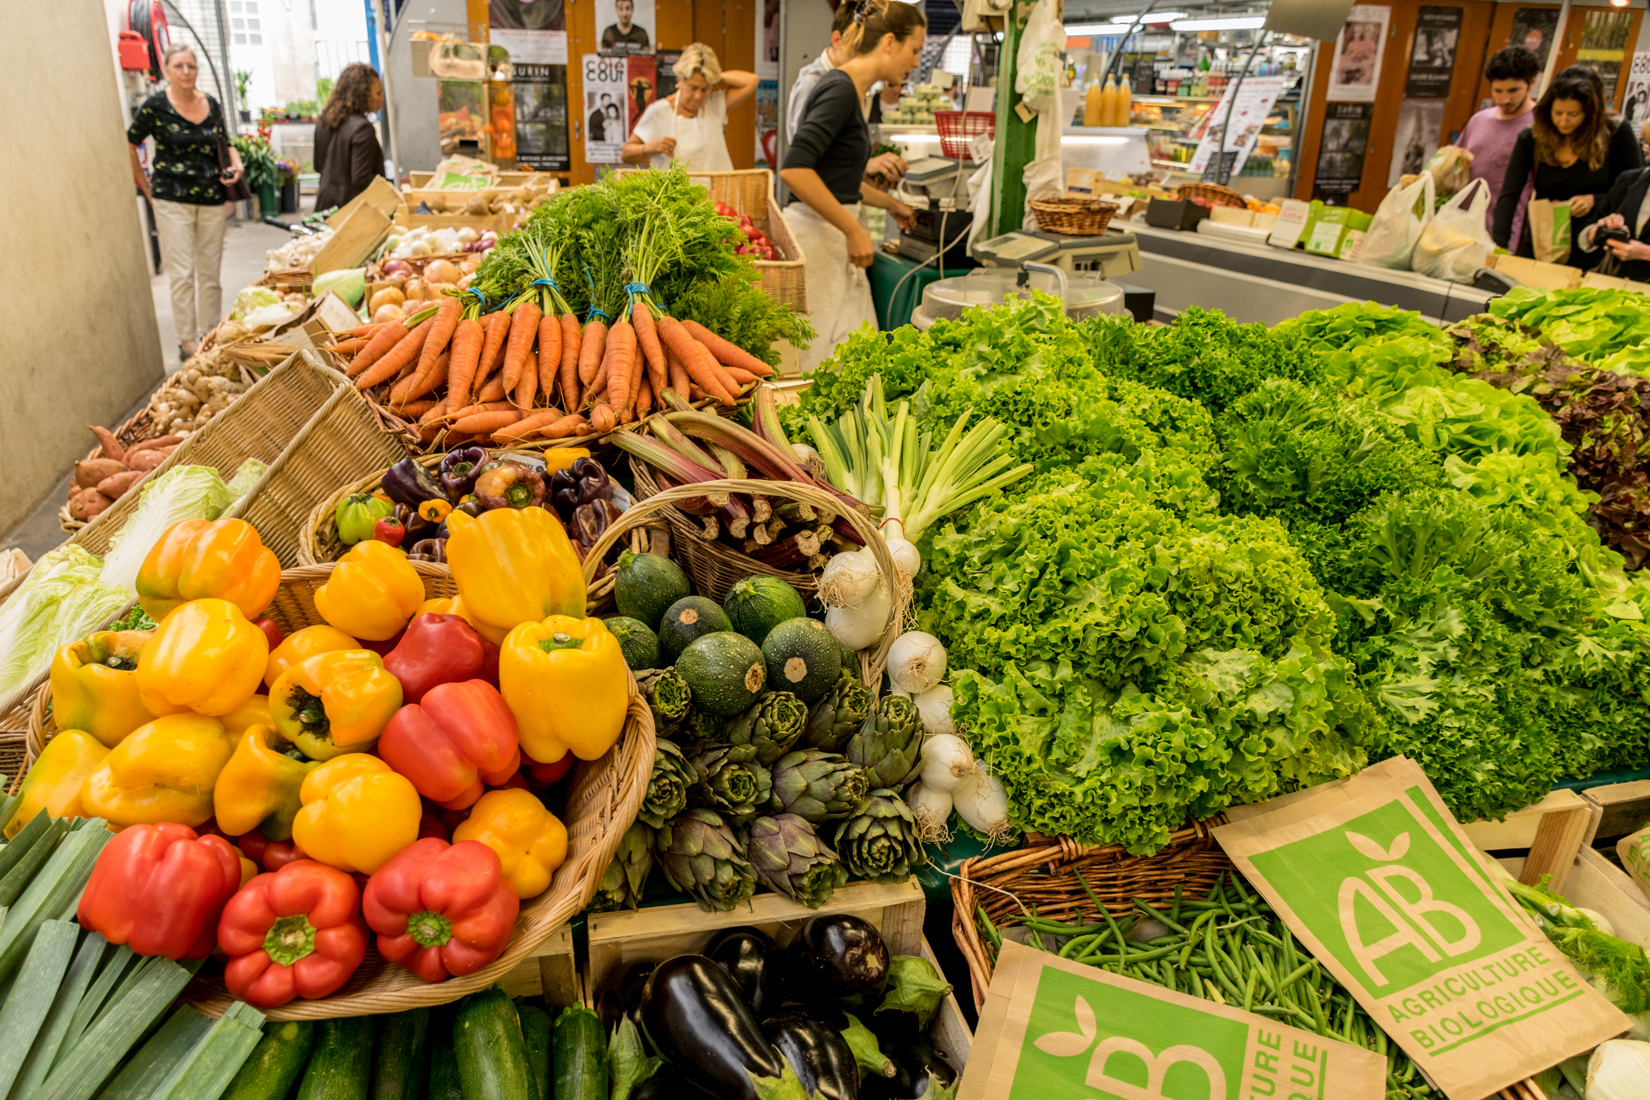 Stall selling only organically grown produce